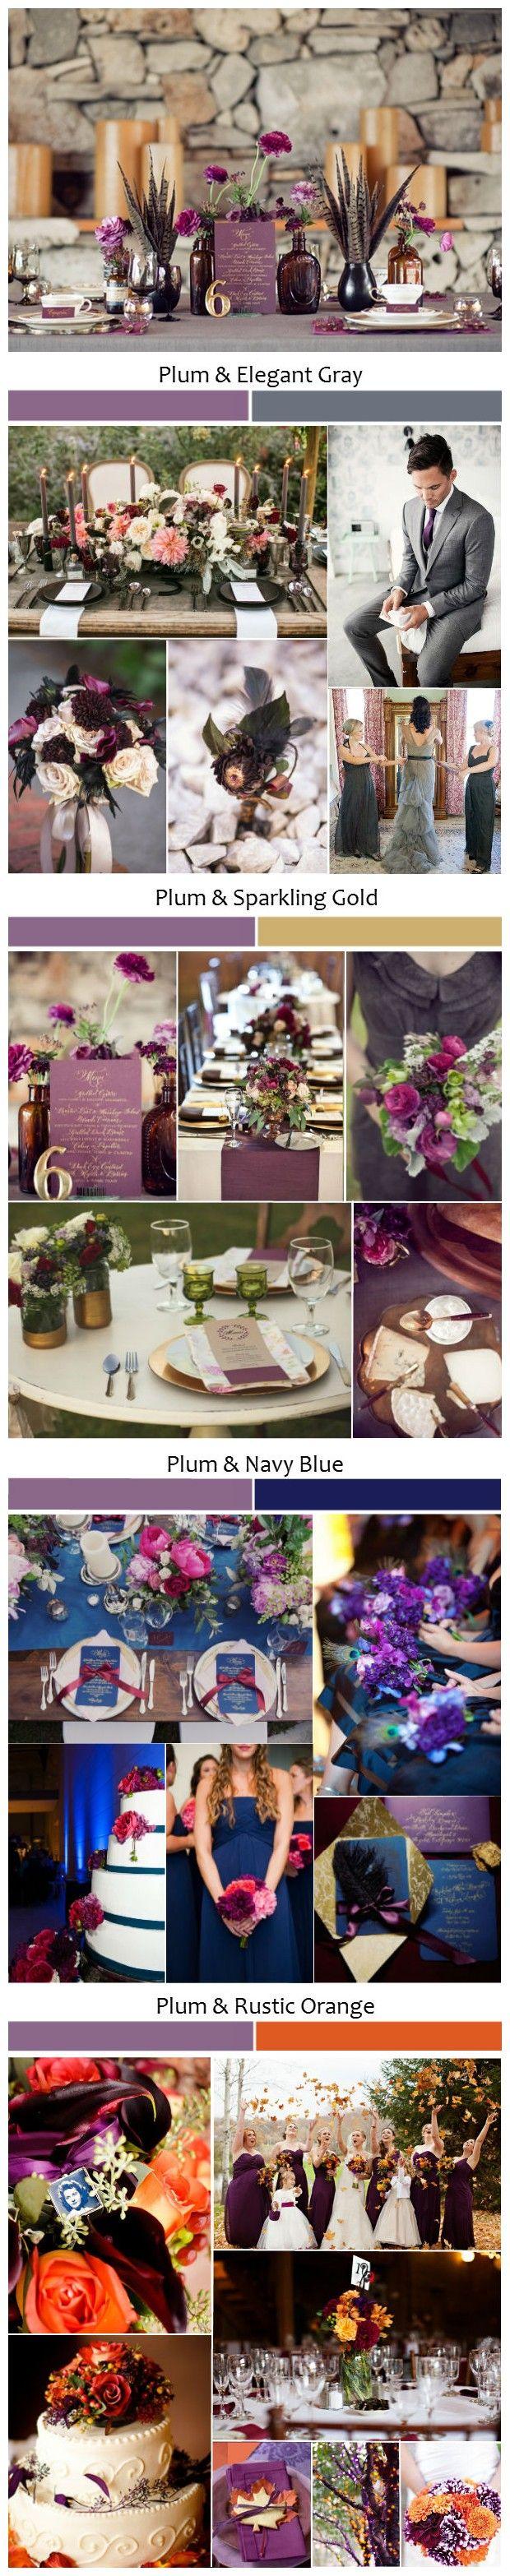 Mariage - Wedding Ideas With Rustic Shades Of Plum